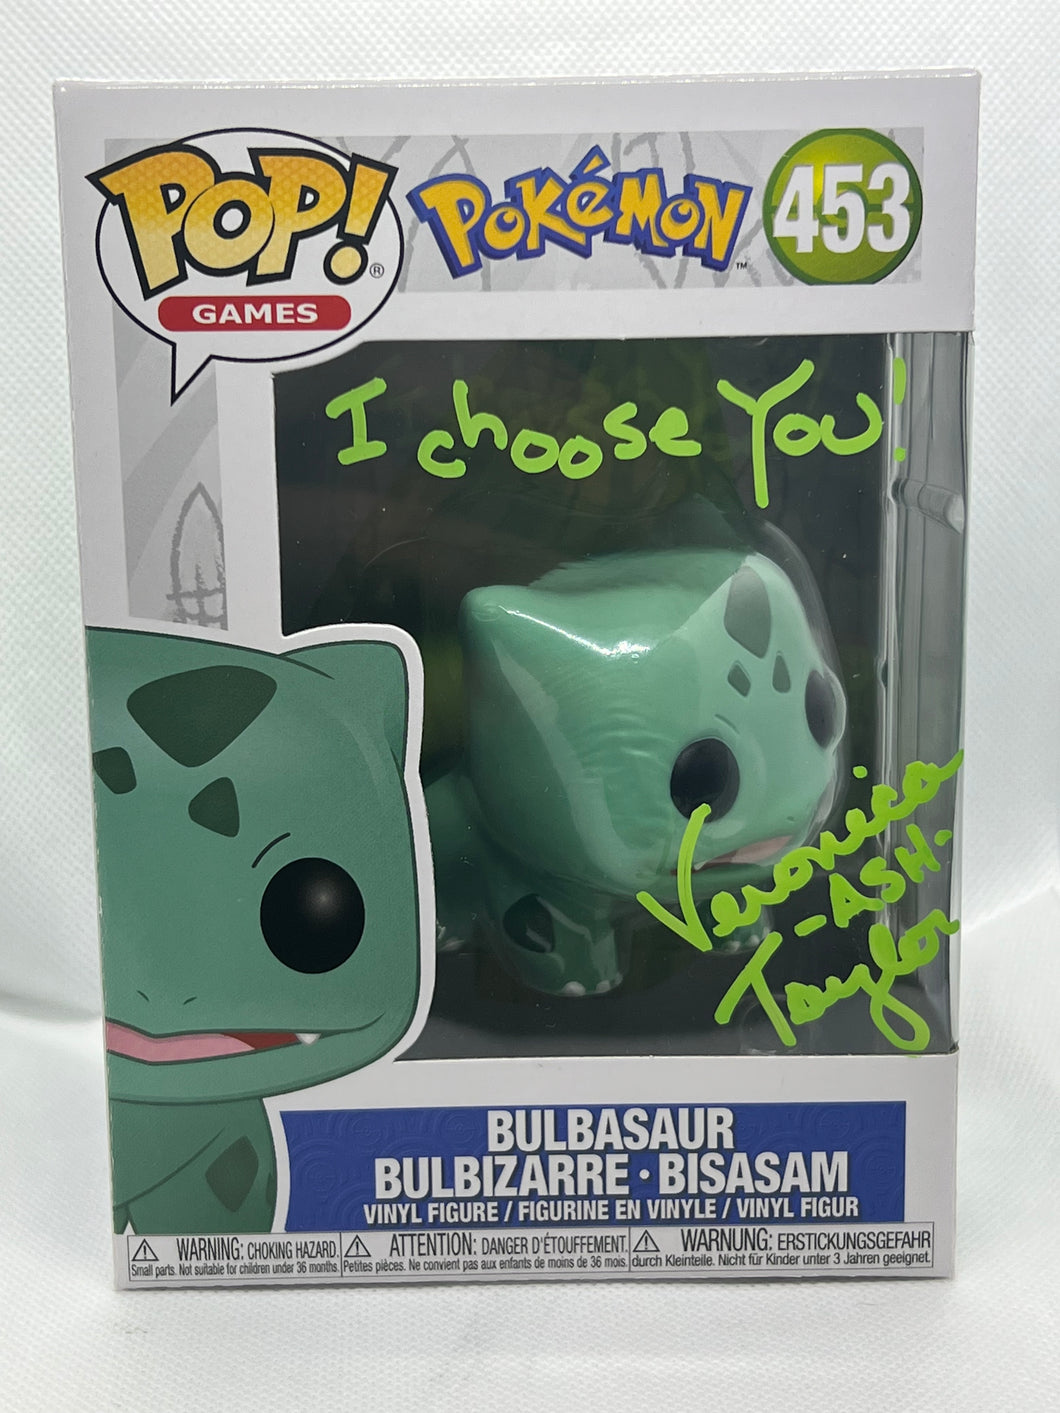 Bulbasaur 453 Pokemon signed by Veronica Taylor with quote